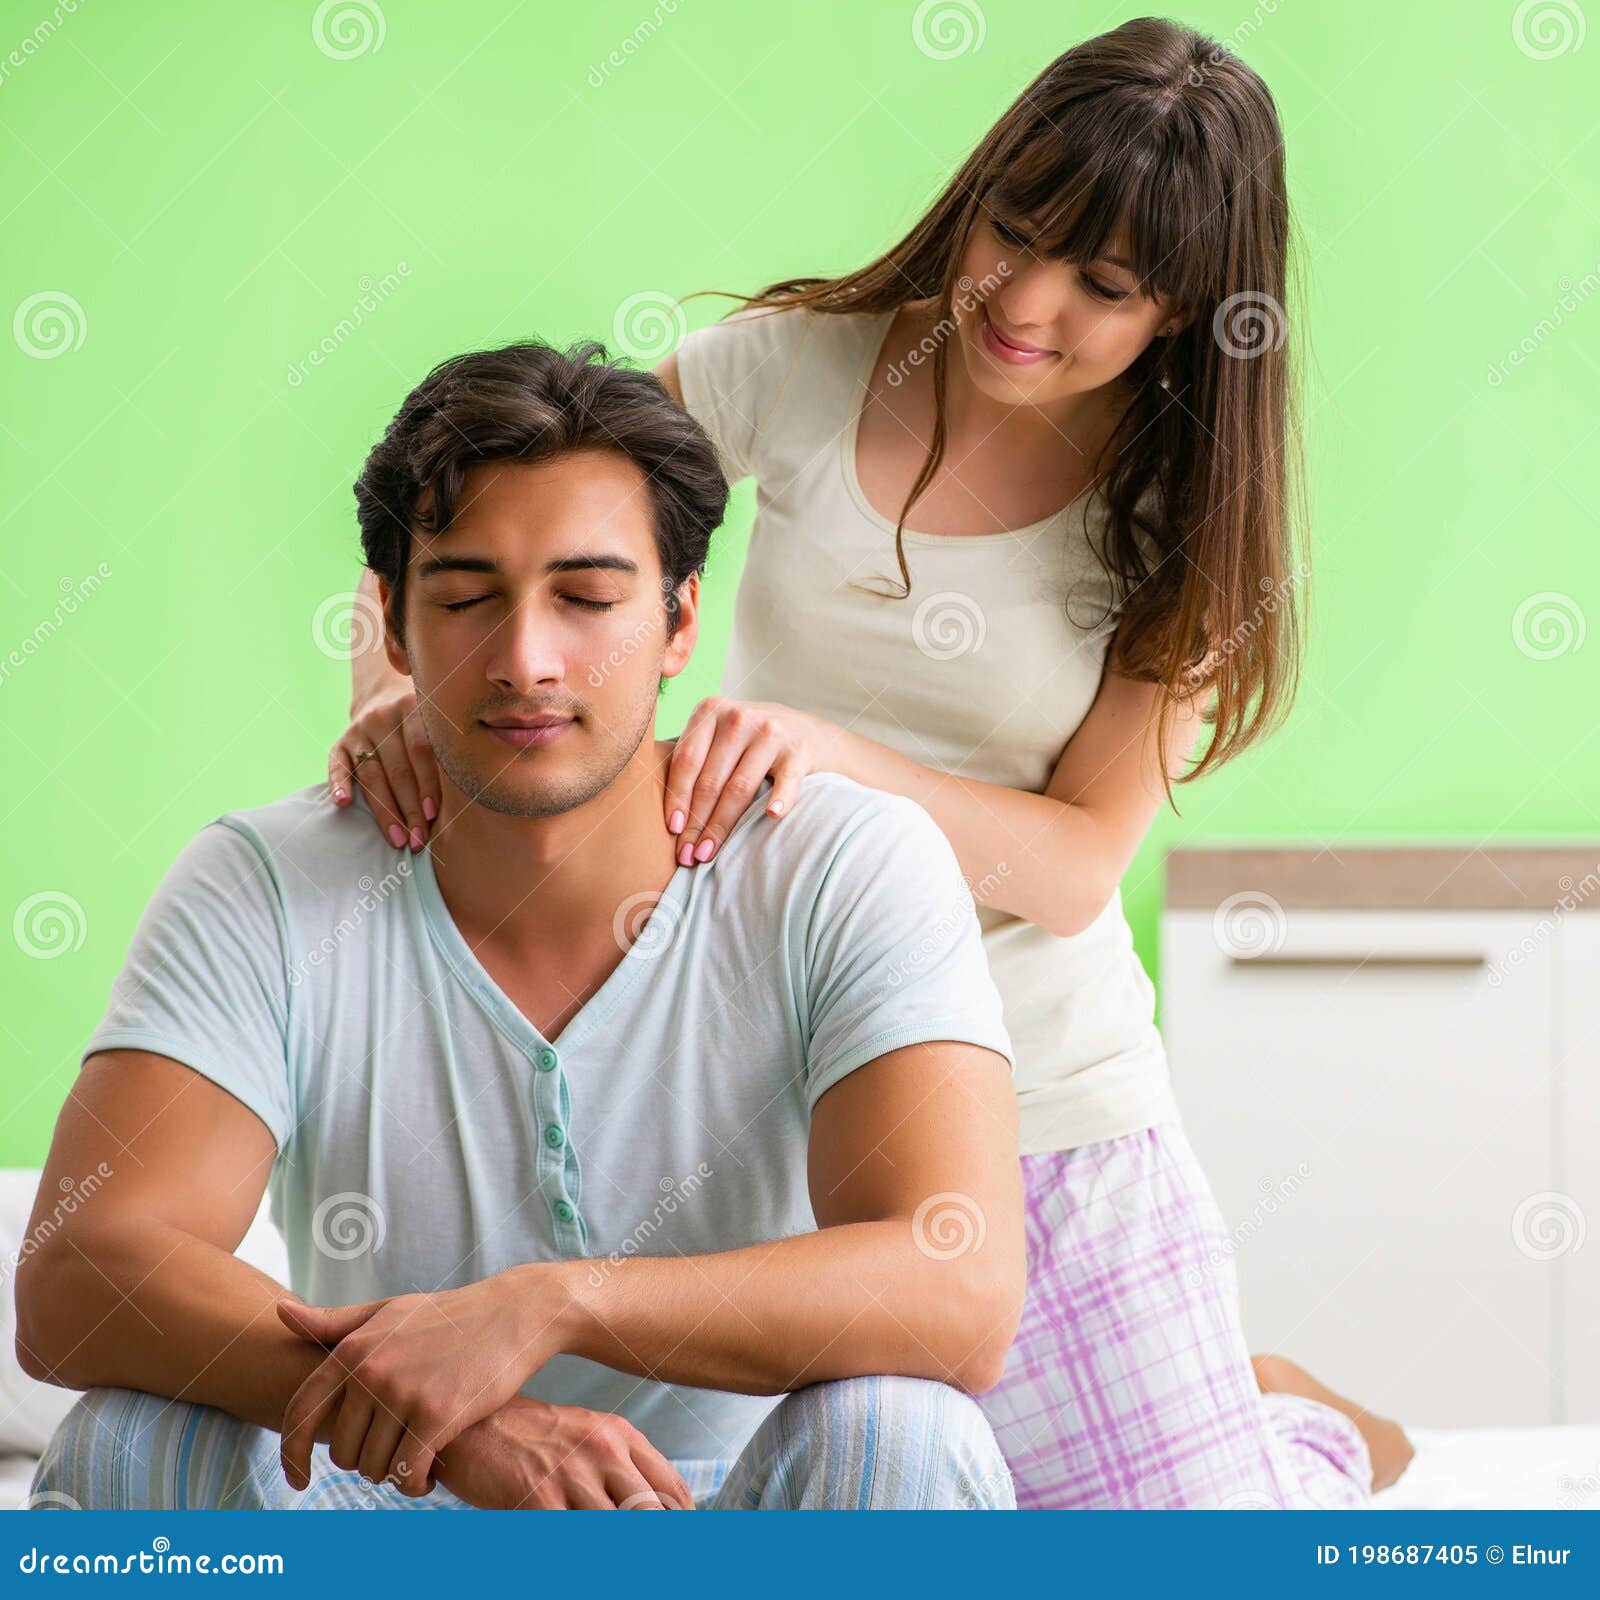 Woman Doing Massage To Her Husband in Bedroom Stock Image